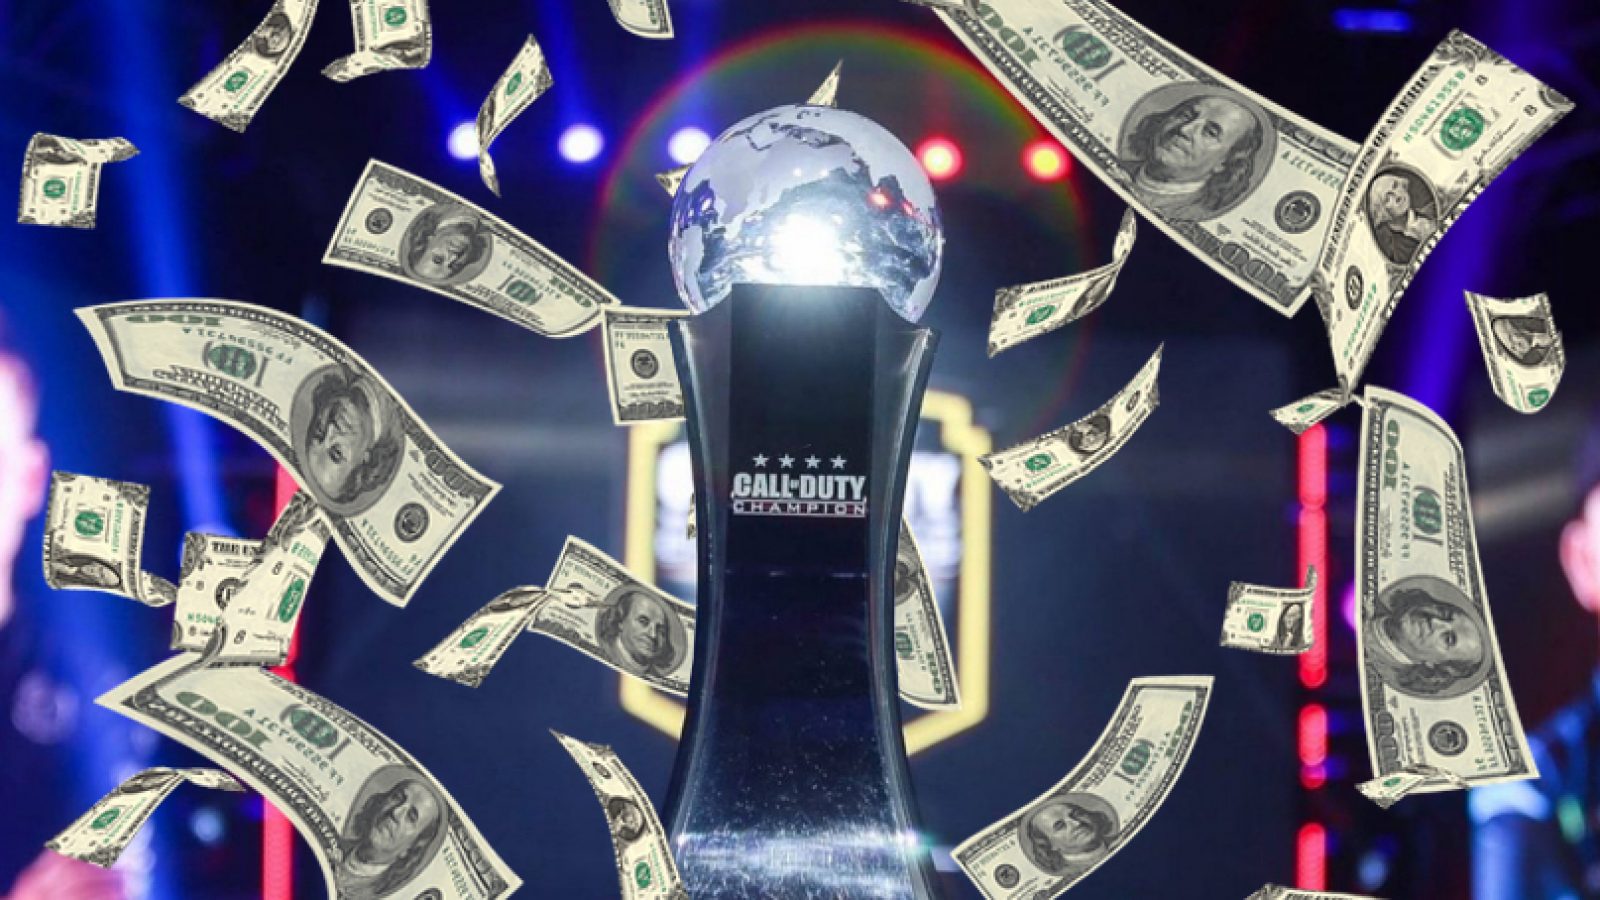 Massive prize pool revealed for 2019 Call of Duty World Championship